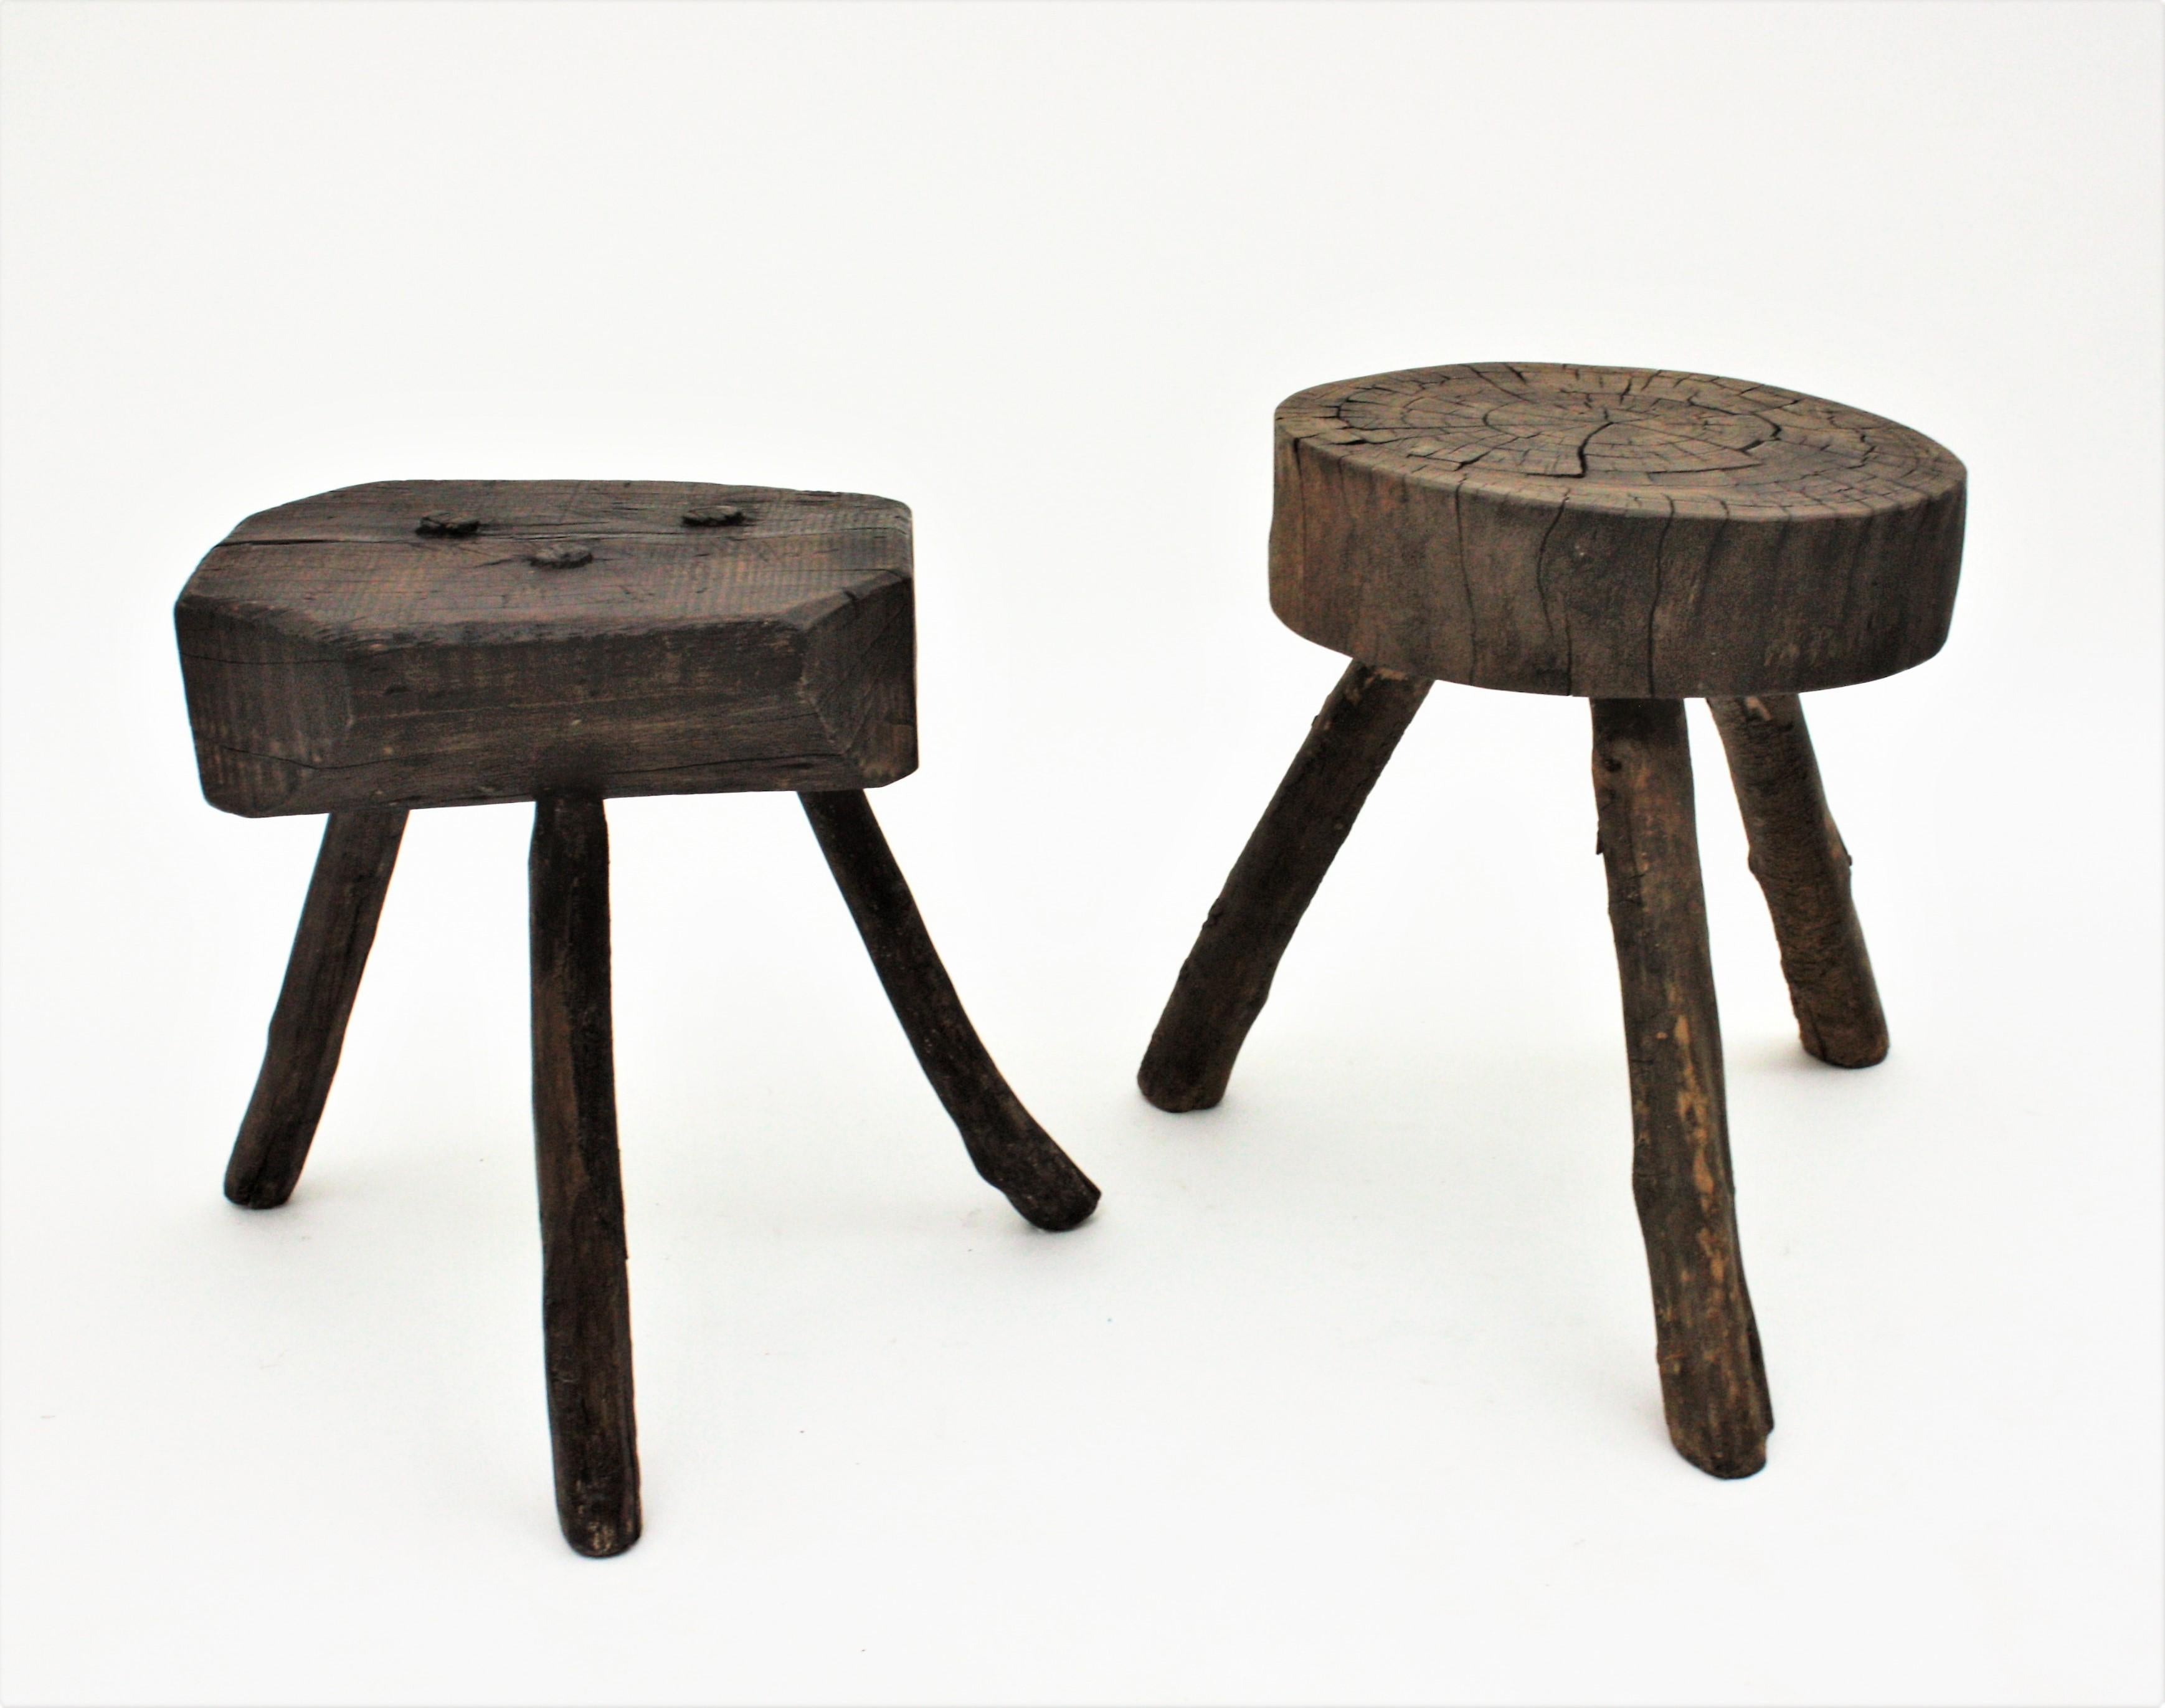 Unmatching pair of spanish rustic wood stools, 1940s.
From the northen part of Spain these thick and solid rustic stools have an sturdy construction.
The thick and aged tops and the primitive construction mark the difference in these pieces.
They